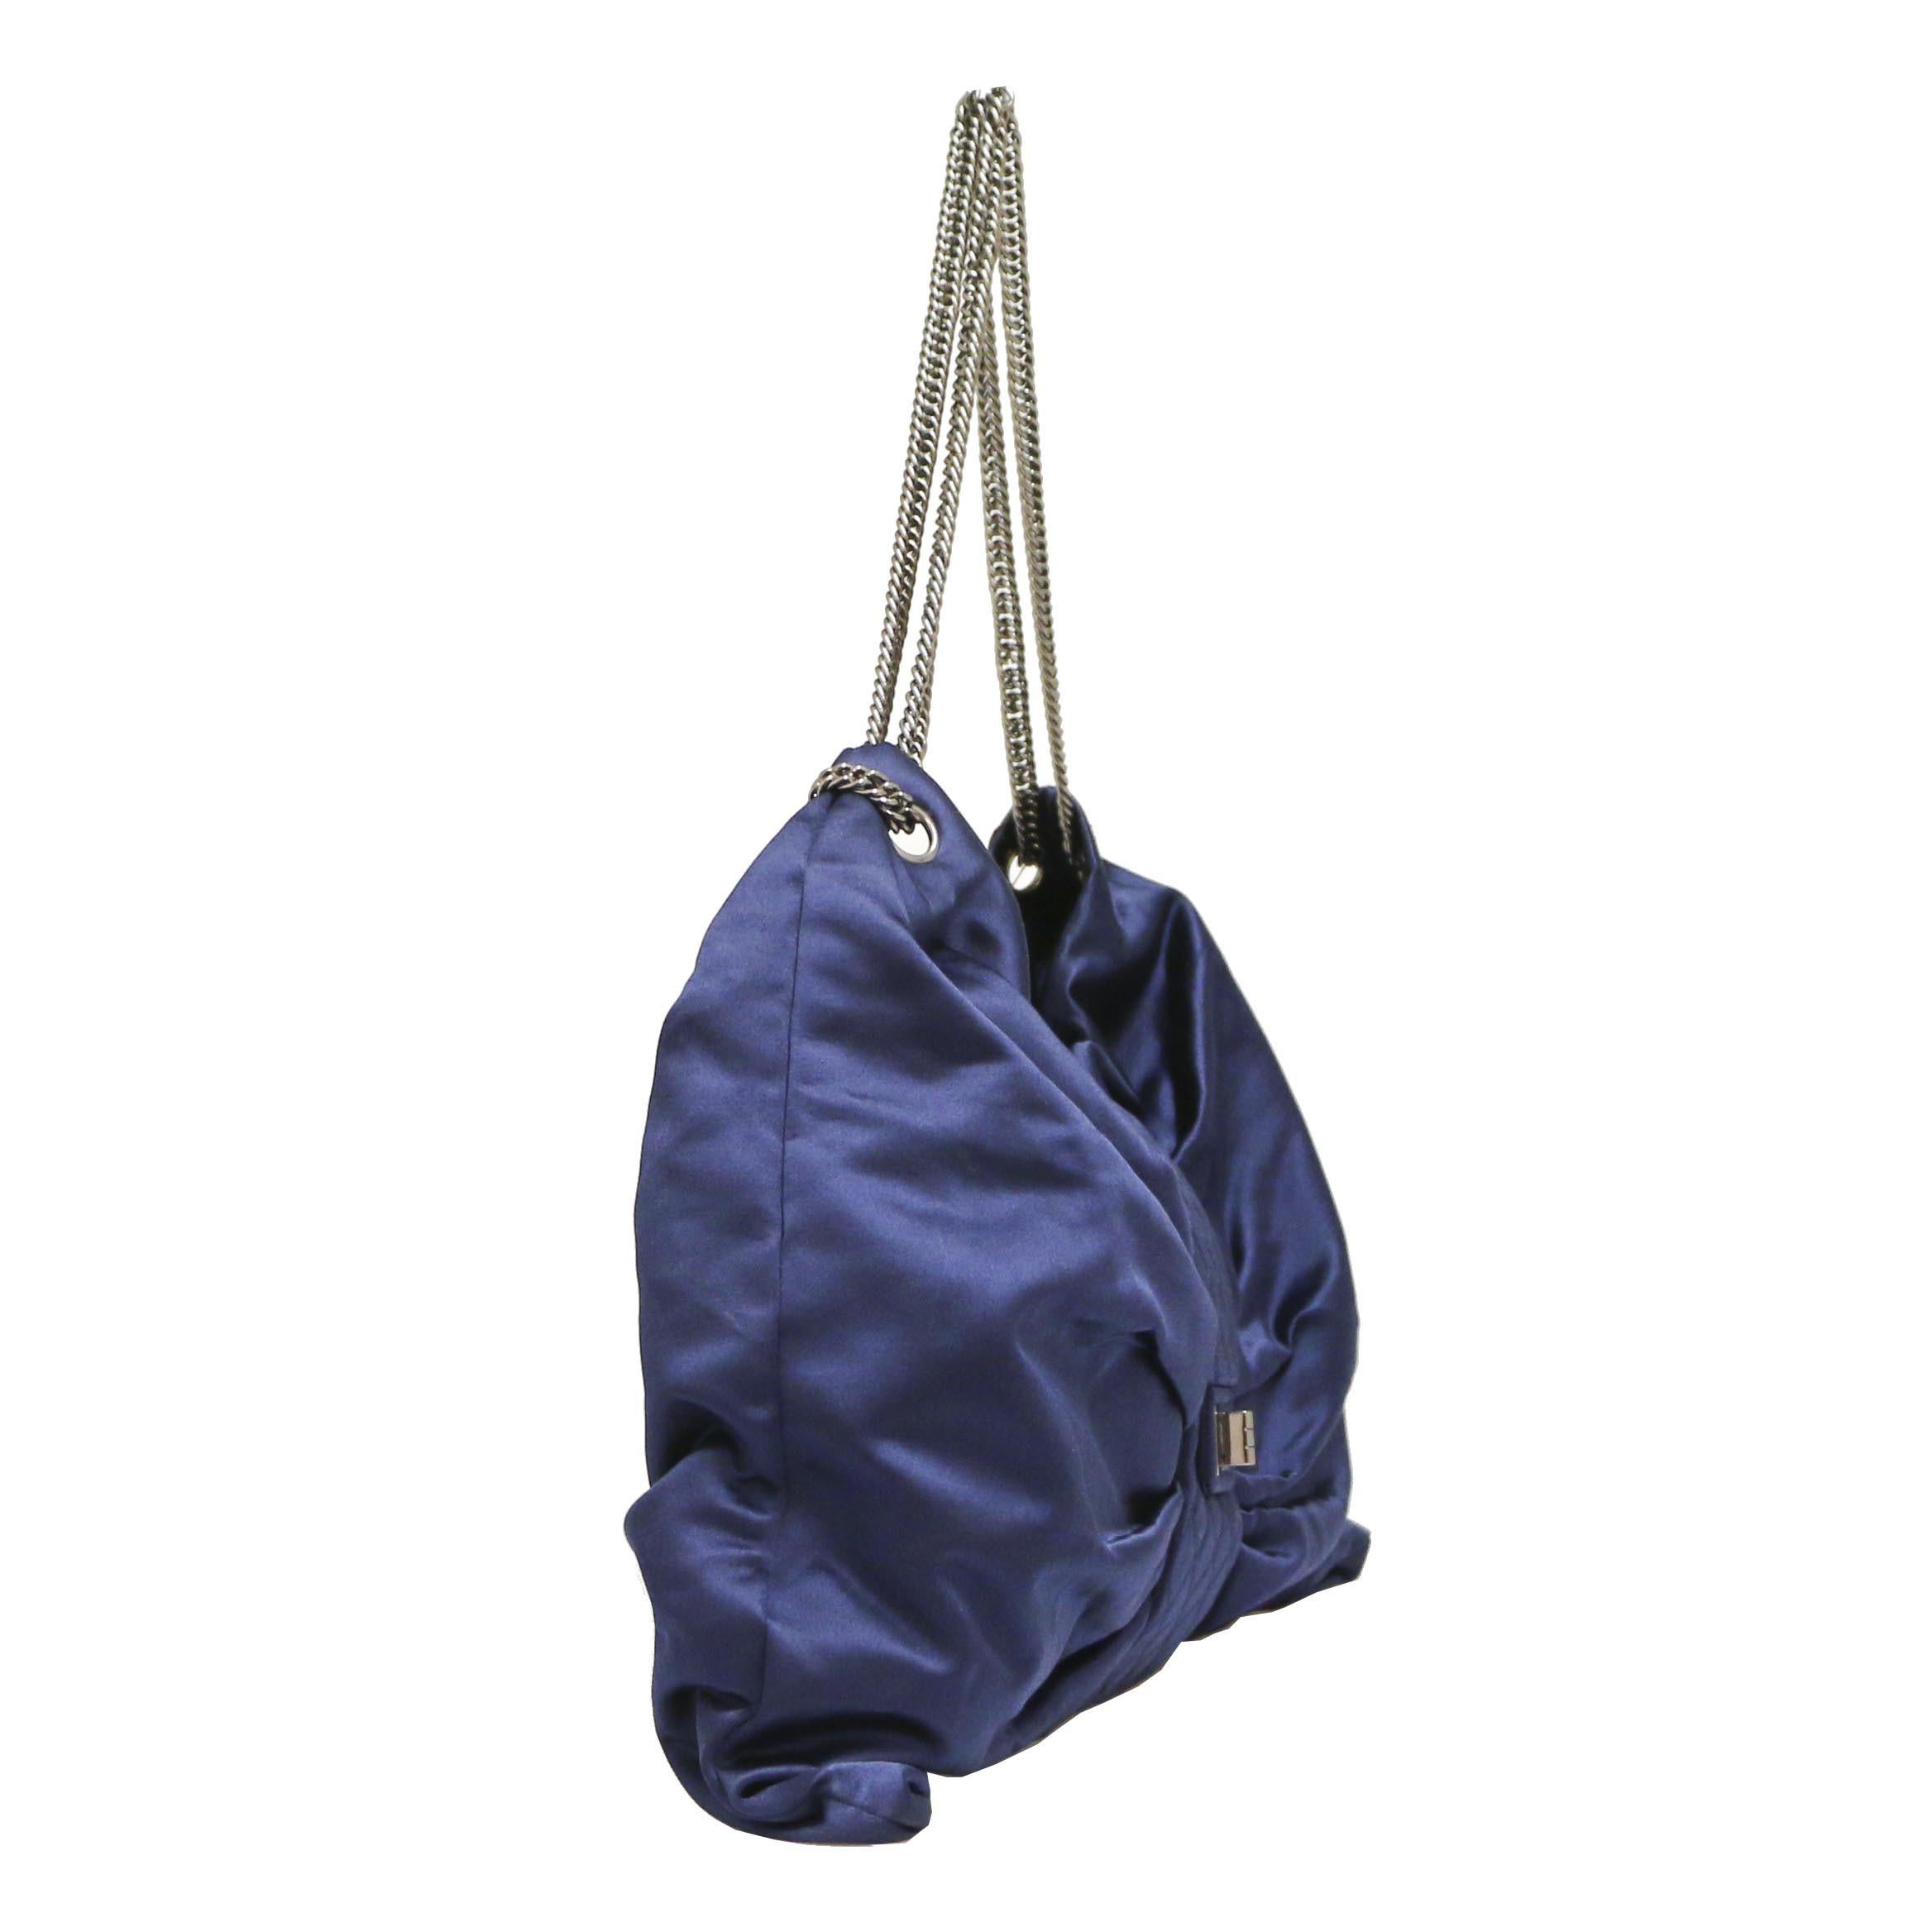 CHANEL butterfly bag in blue satin duchesse. The hardware is in palladium-plated silver metal. The lining is in Gray fabric. Clasp 2.55.
In very good condition.
Made in Italy.
Dimensions: 54 x 45 x 12cm
Shoulder strap: single 81 cm or double 52